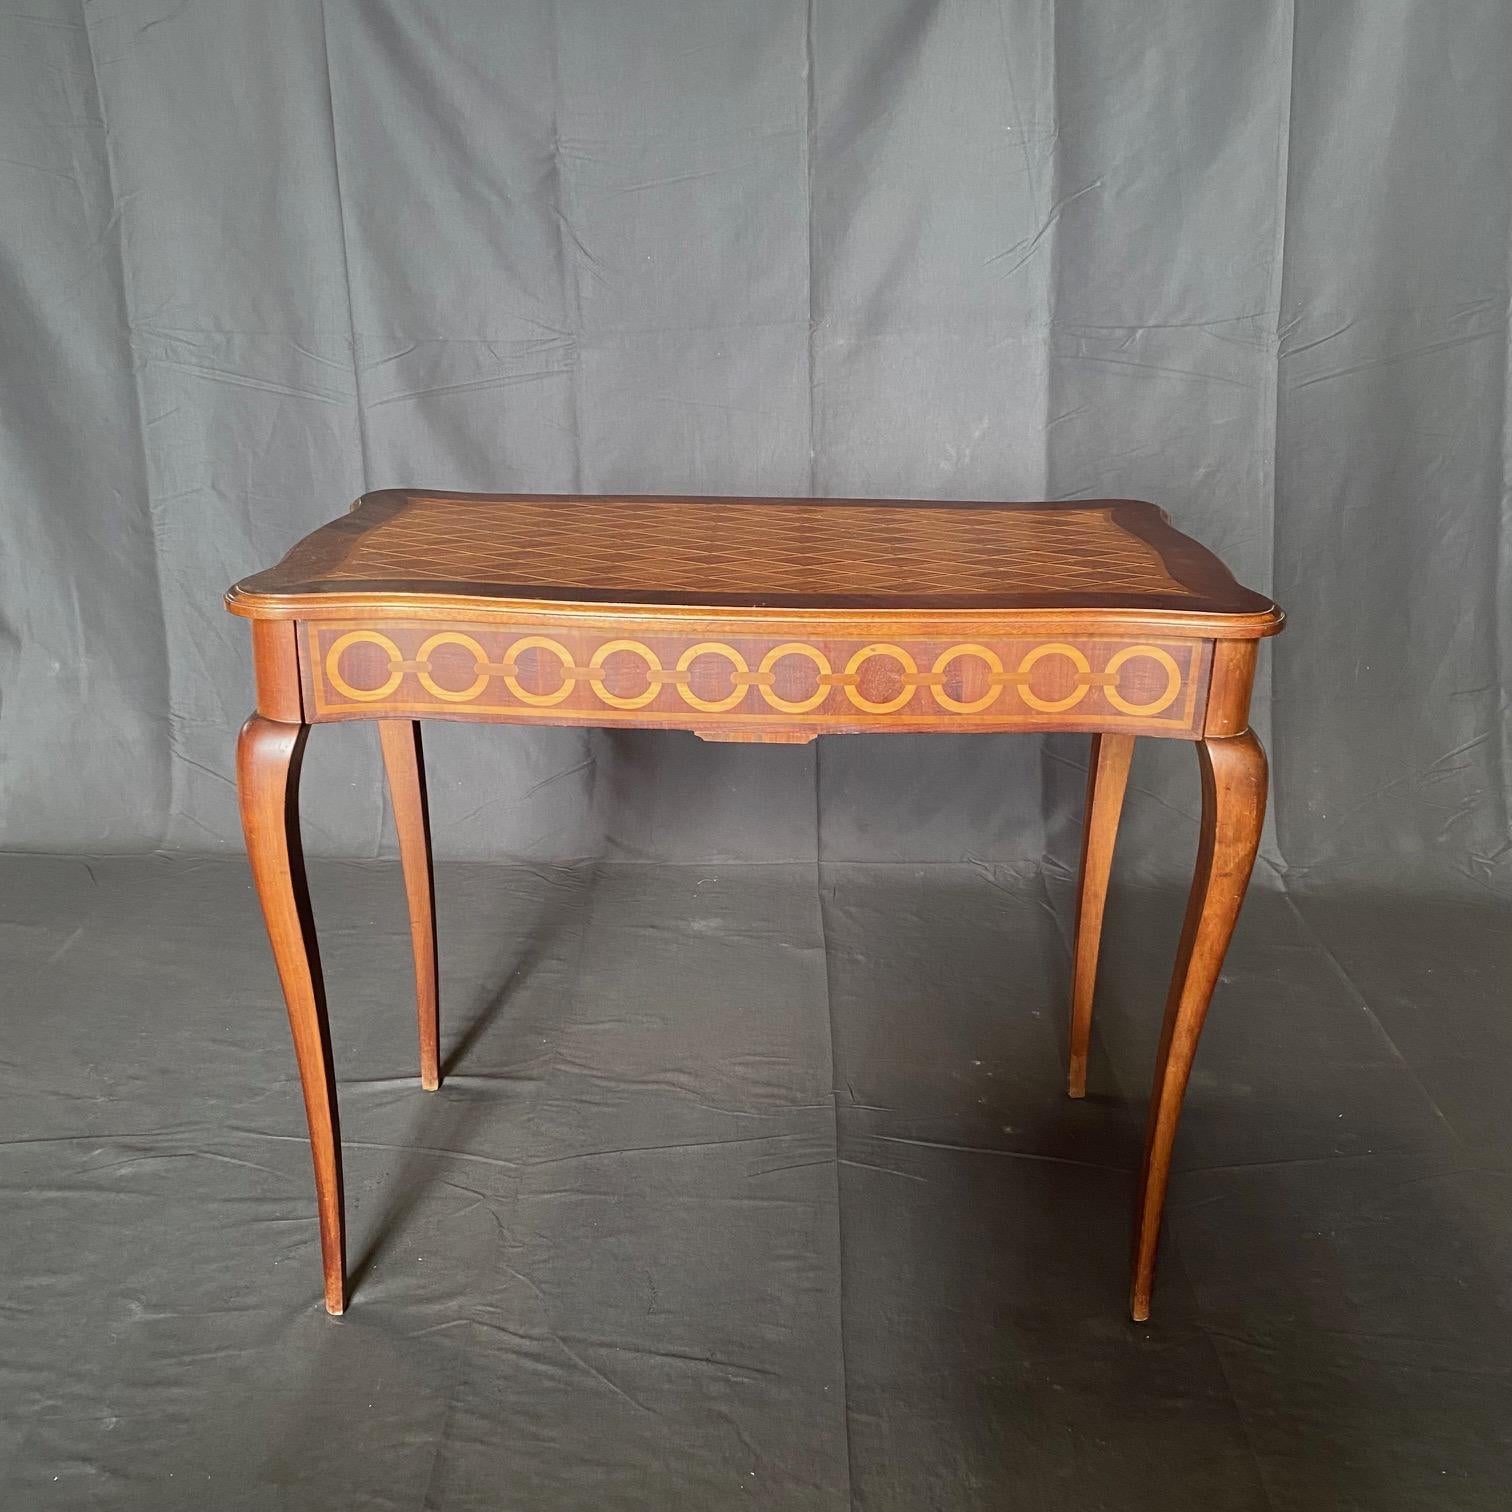  French Directoire Inlaid Marquetry Side Table or Desk with Meticulous Inlay For Sale 5